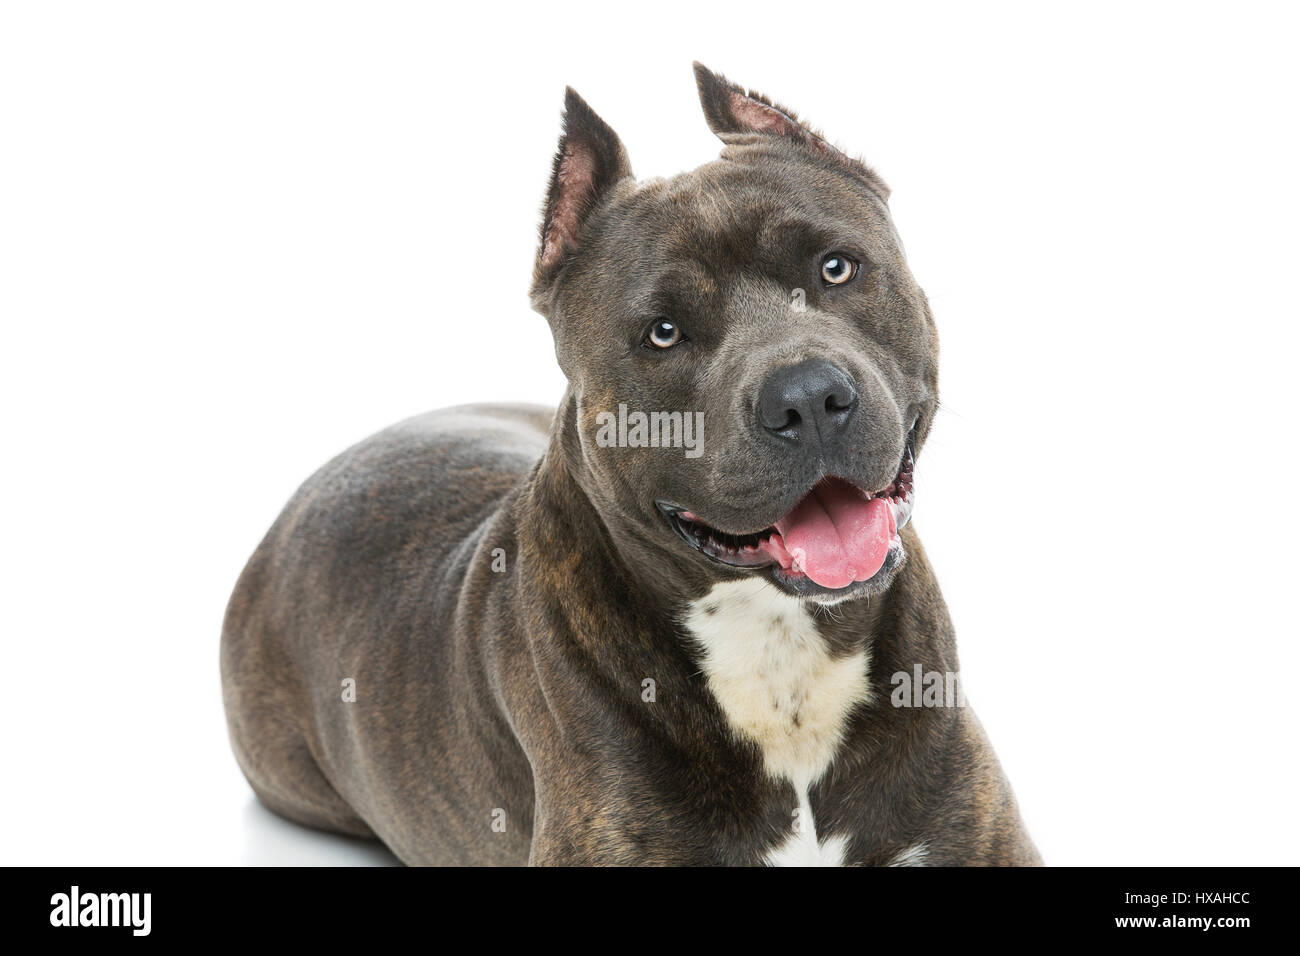 Beautiful american staffordshire terrier dog. Tiger blue color male pet. Isolated on white background. Stock Photo